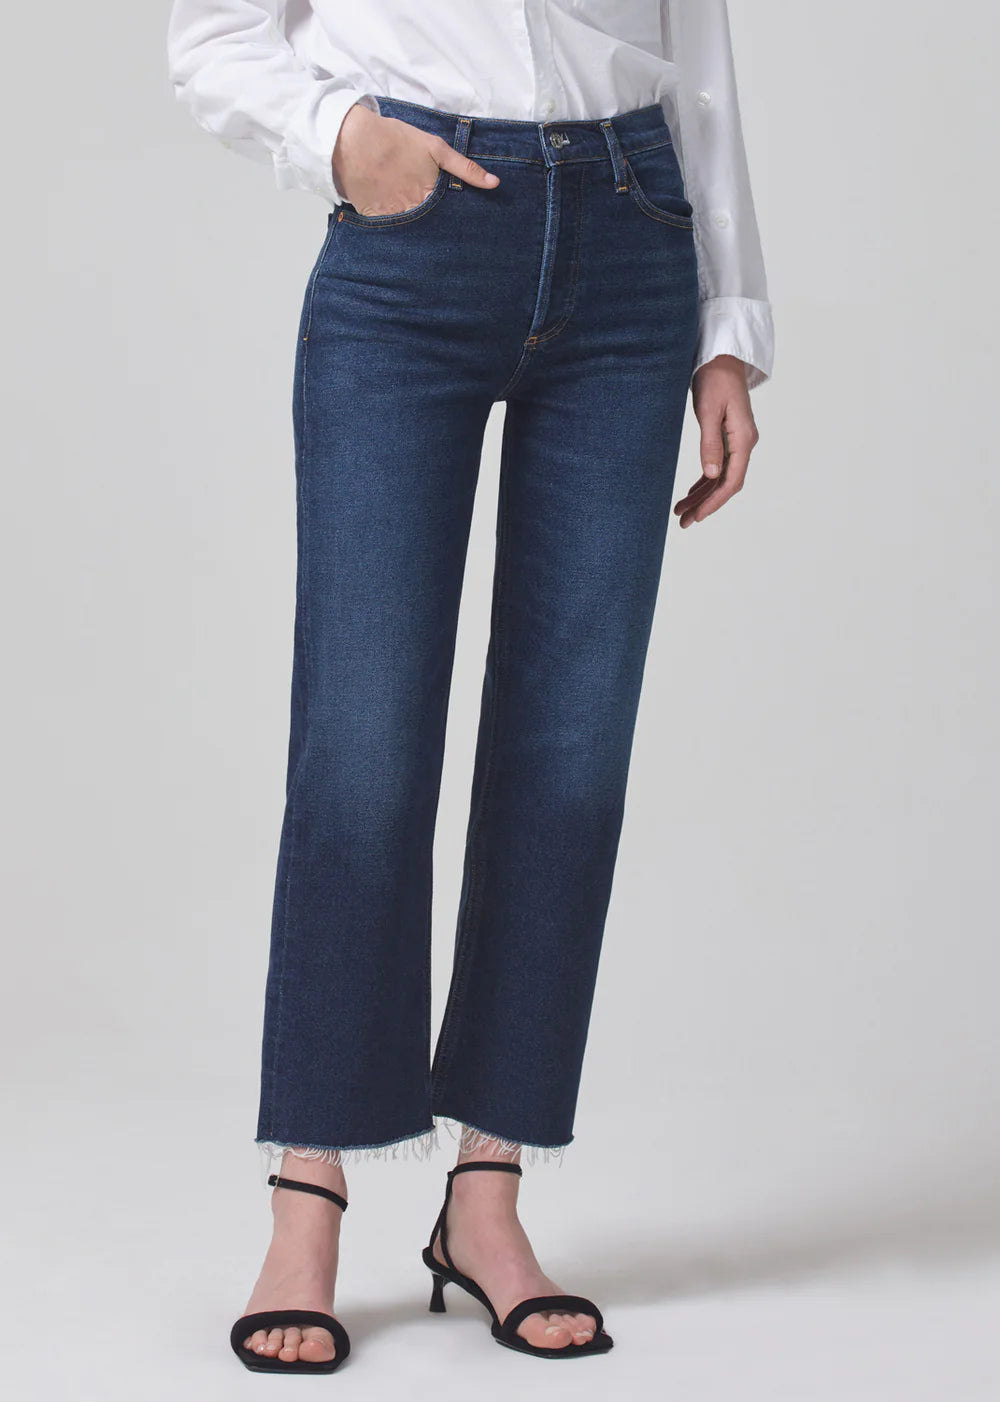 Florence Jeans Wide Straight in Everdeen-Jeans-Citizens Of Humanity-AKAT studio